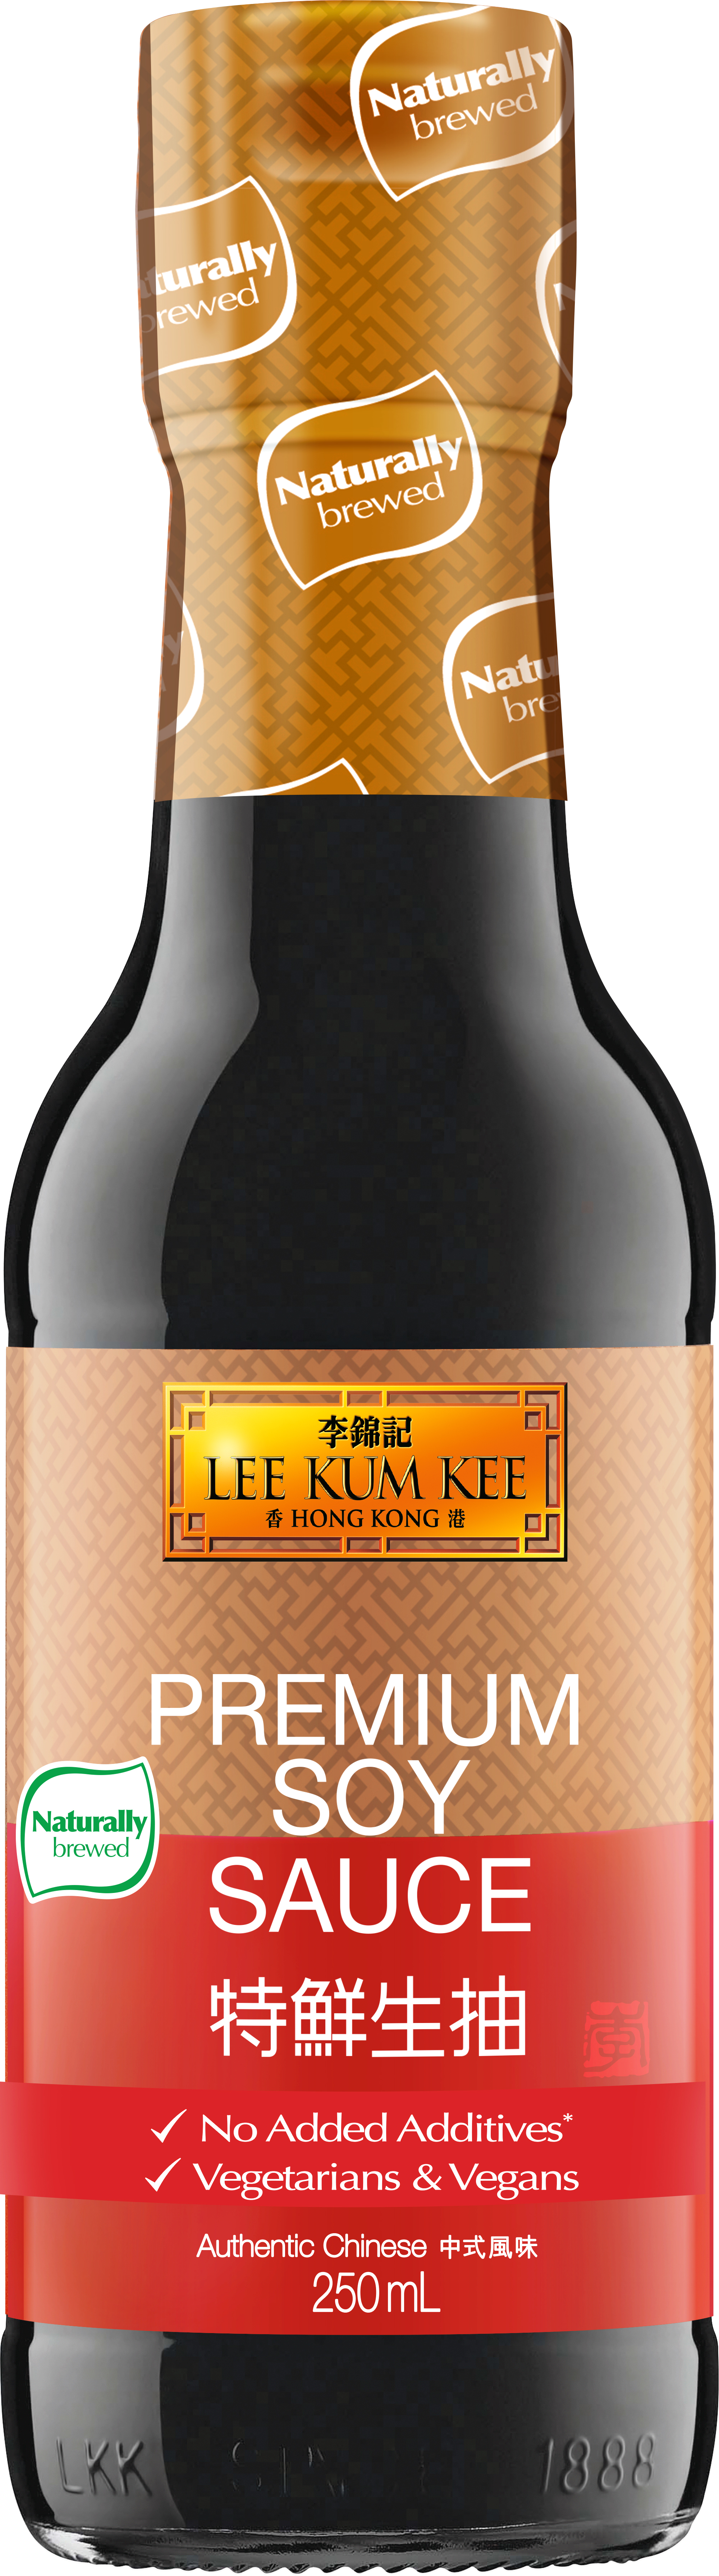 Premium Soy Sauce 250 ml naturally brewed icon